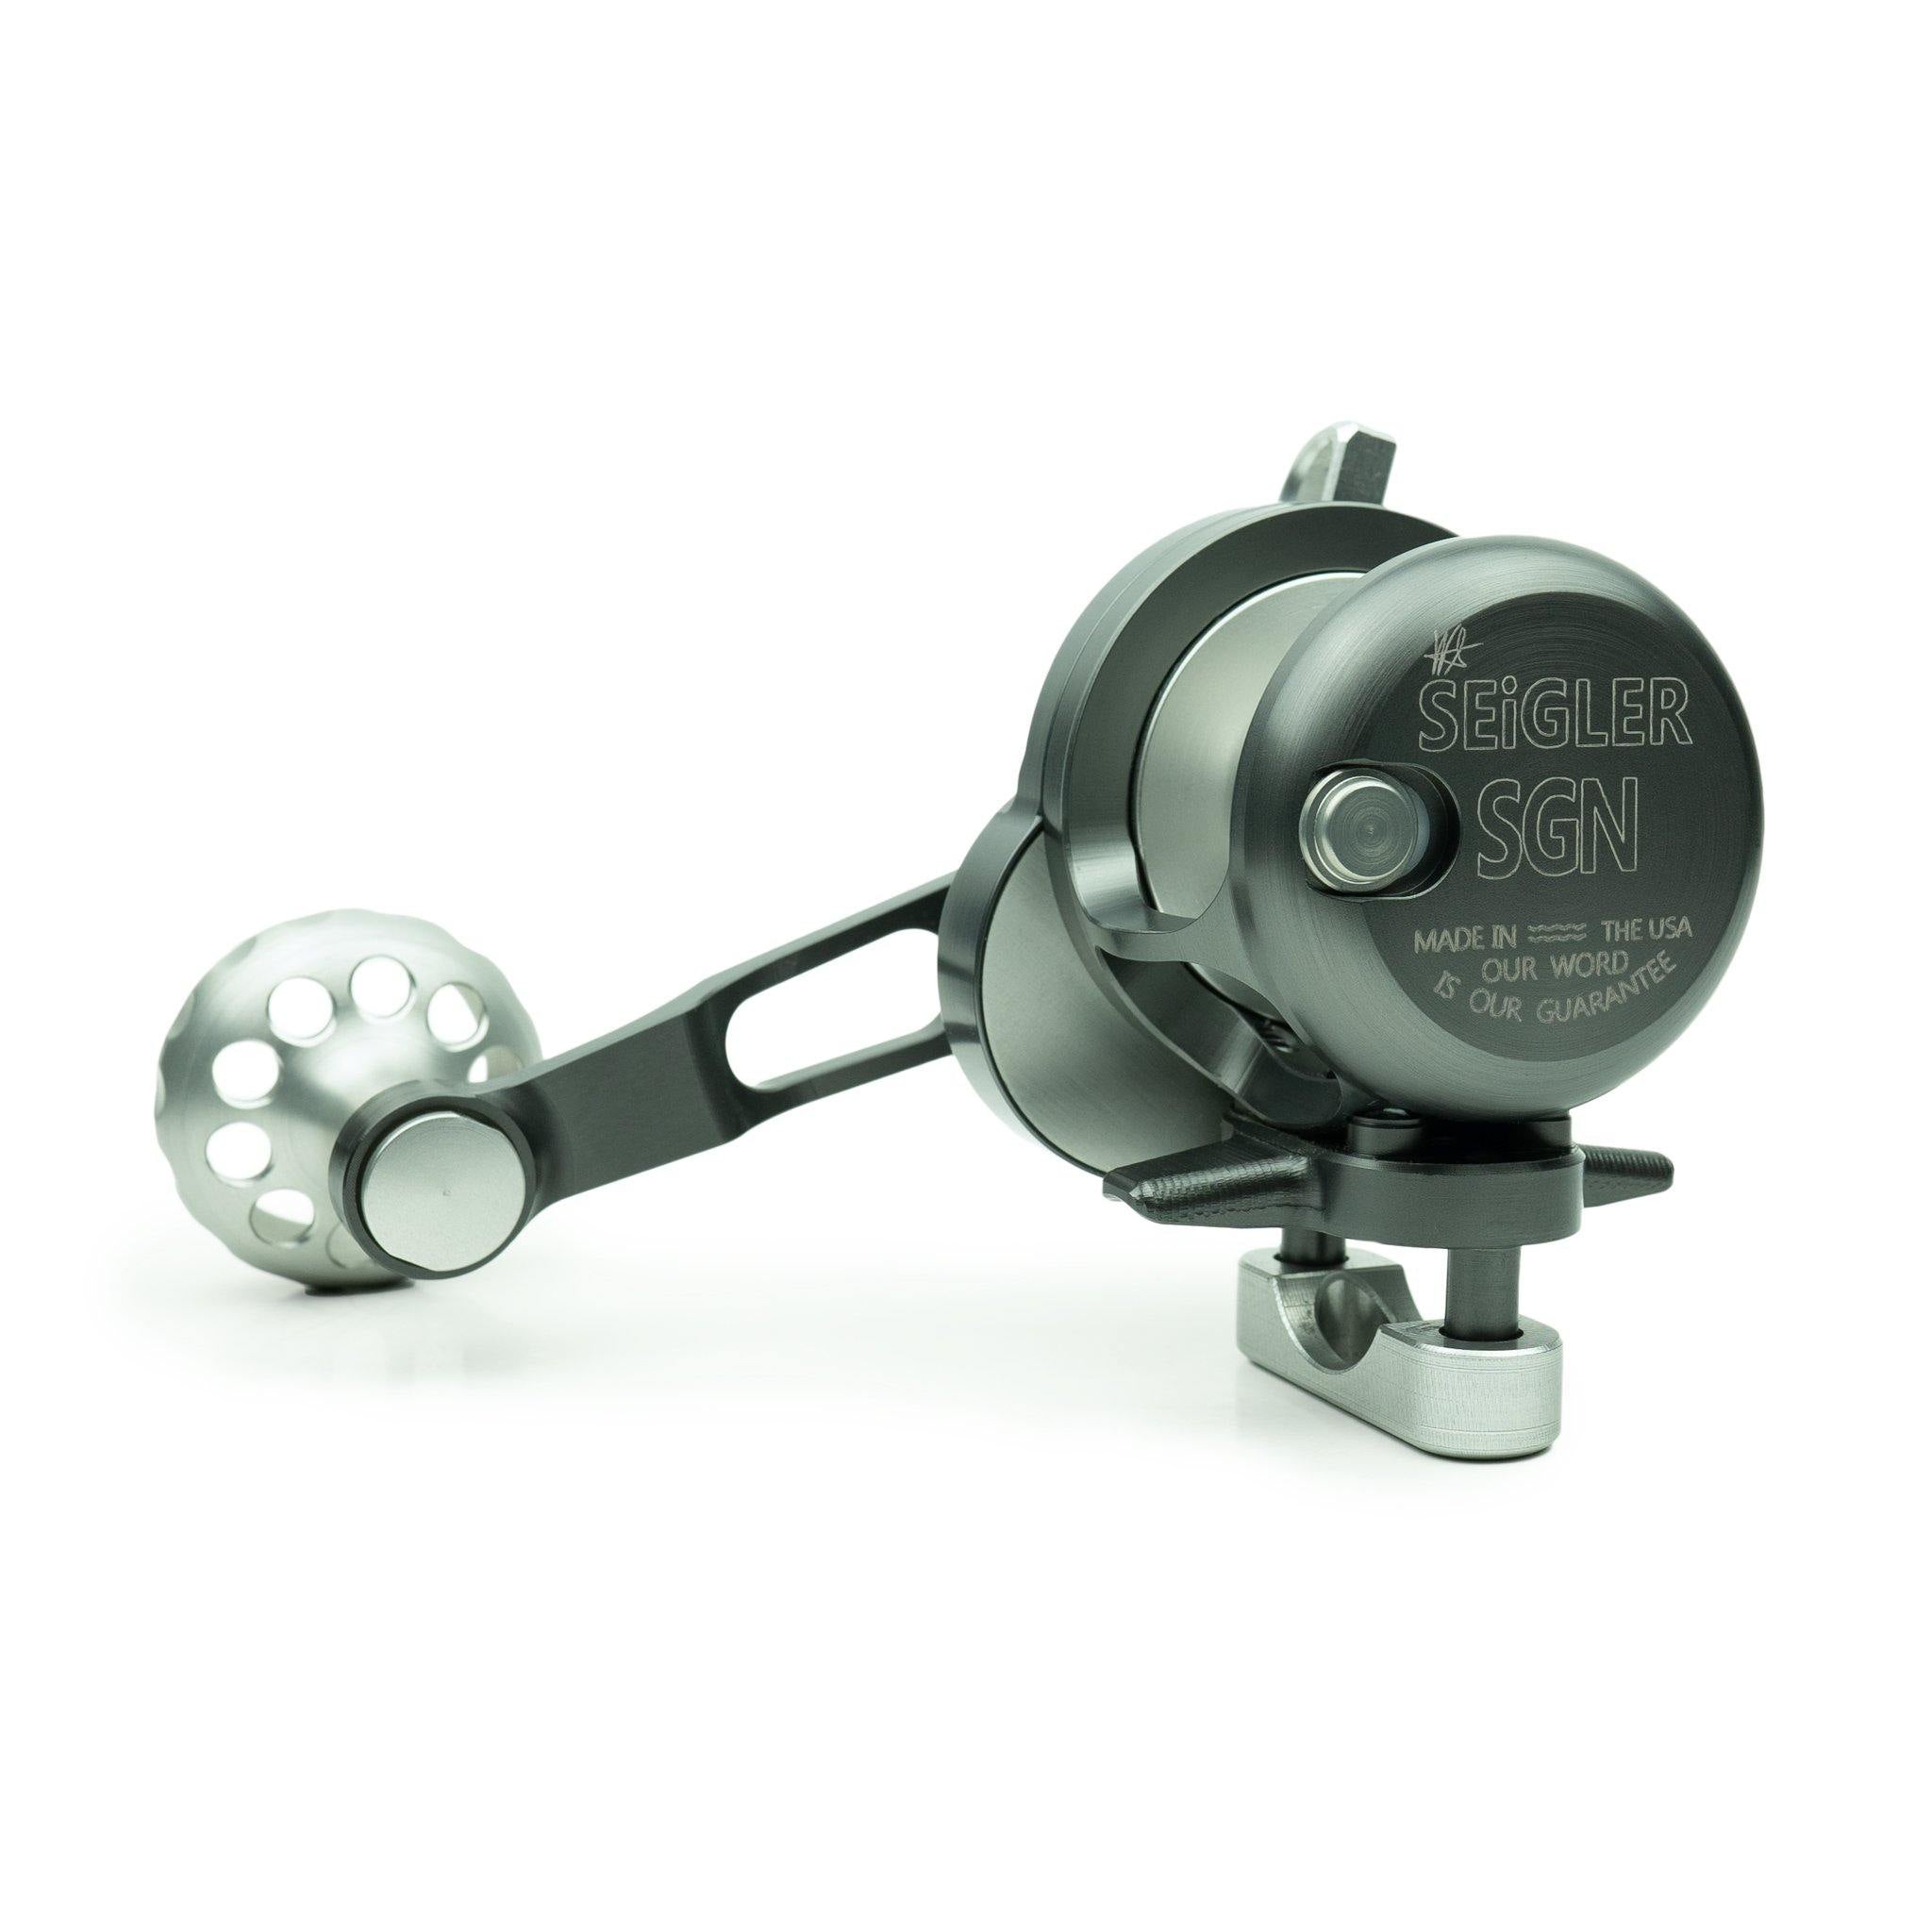 Seigler Reels - SGN - Fish & Tackle